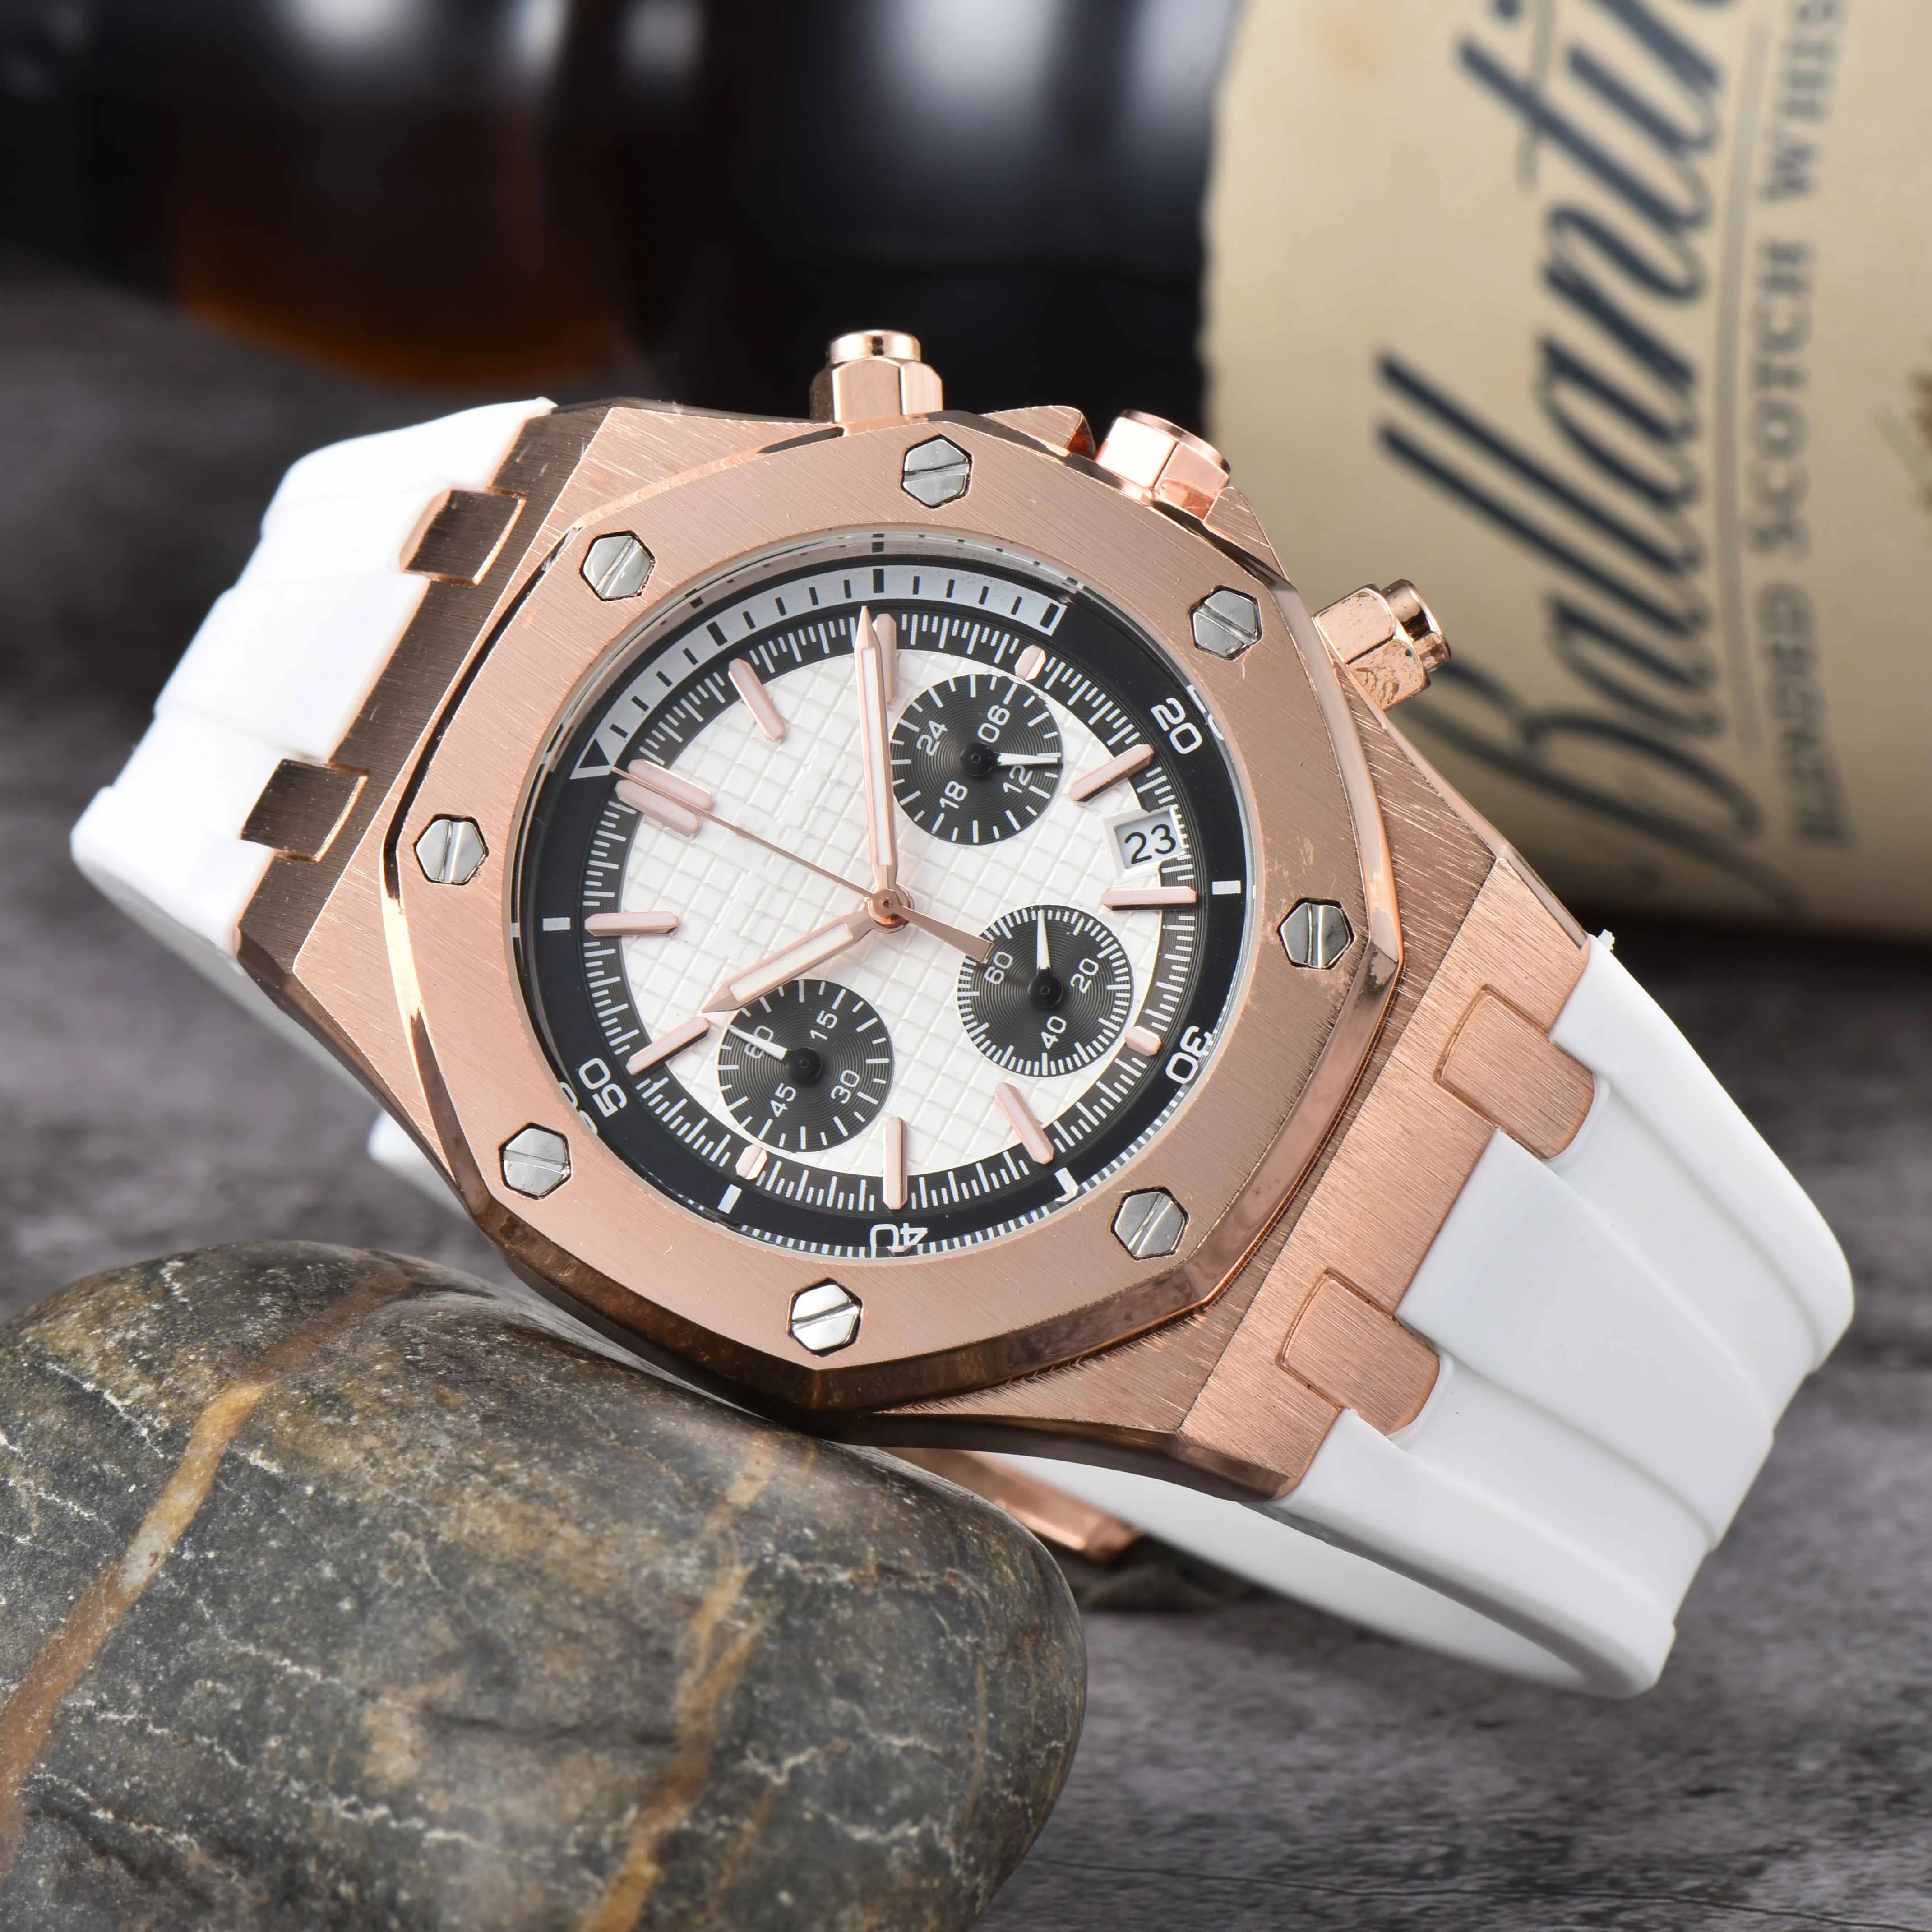 Watches High Quality Business Fashion Watch 42mm Classic Rubber High-kvalitet Designer Men's Classic Sapphire Dial Full Function Waterproof Quartz Watch